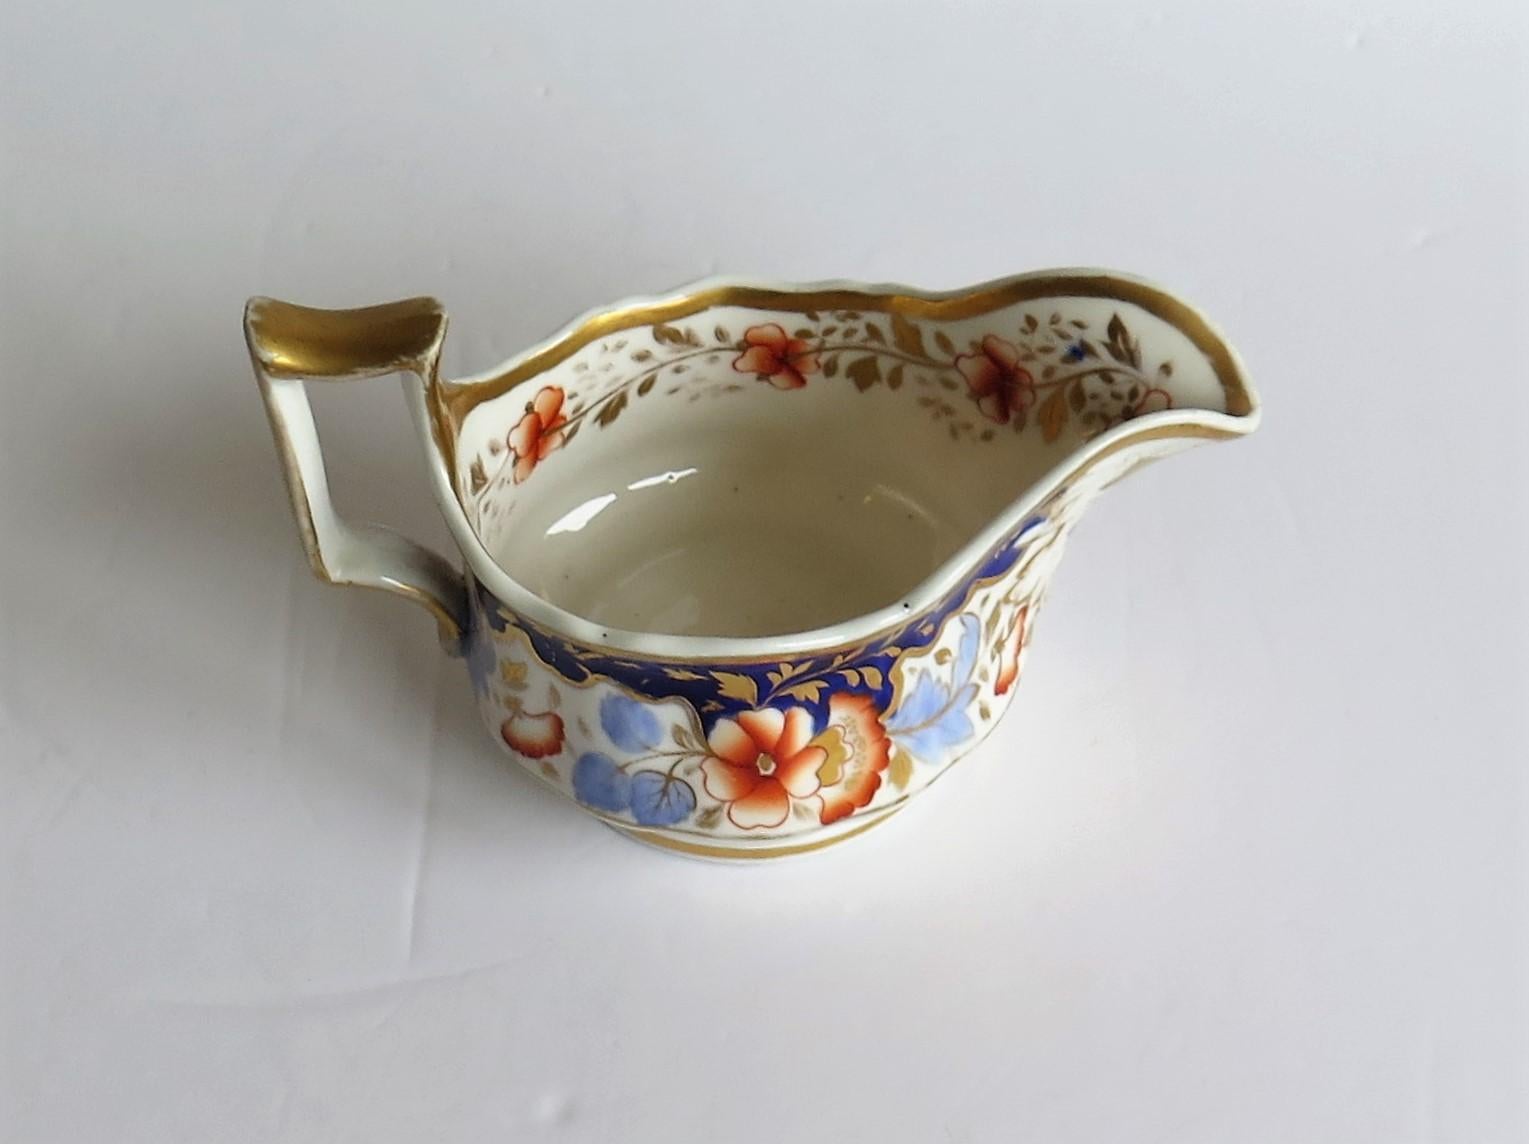 Ridgway Porcelain Milk Jug or Creamer Pattern 2/1005, Regency Period, circa 1825 In Good Condition For Sale In Lincoln, Lincolnshire